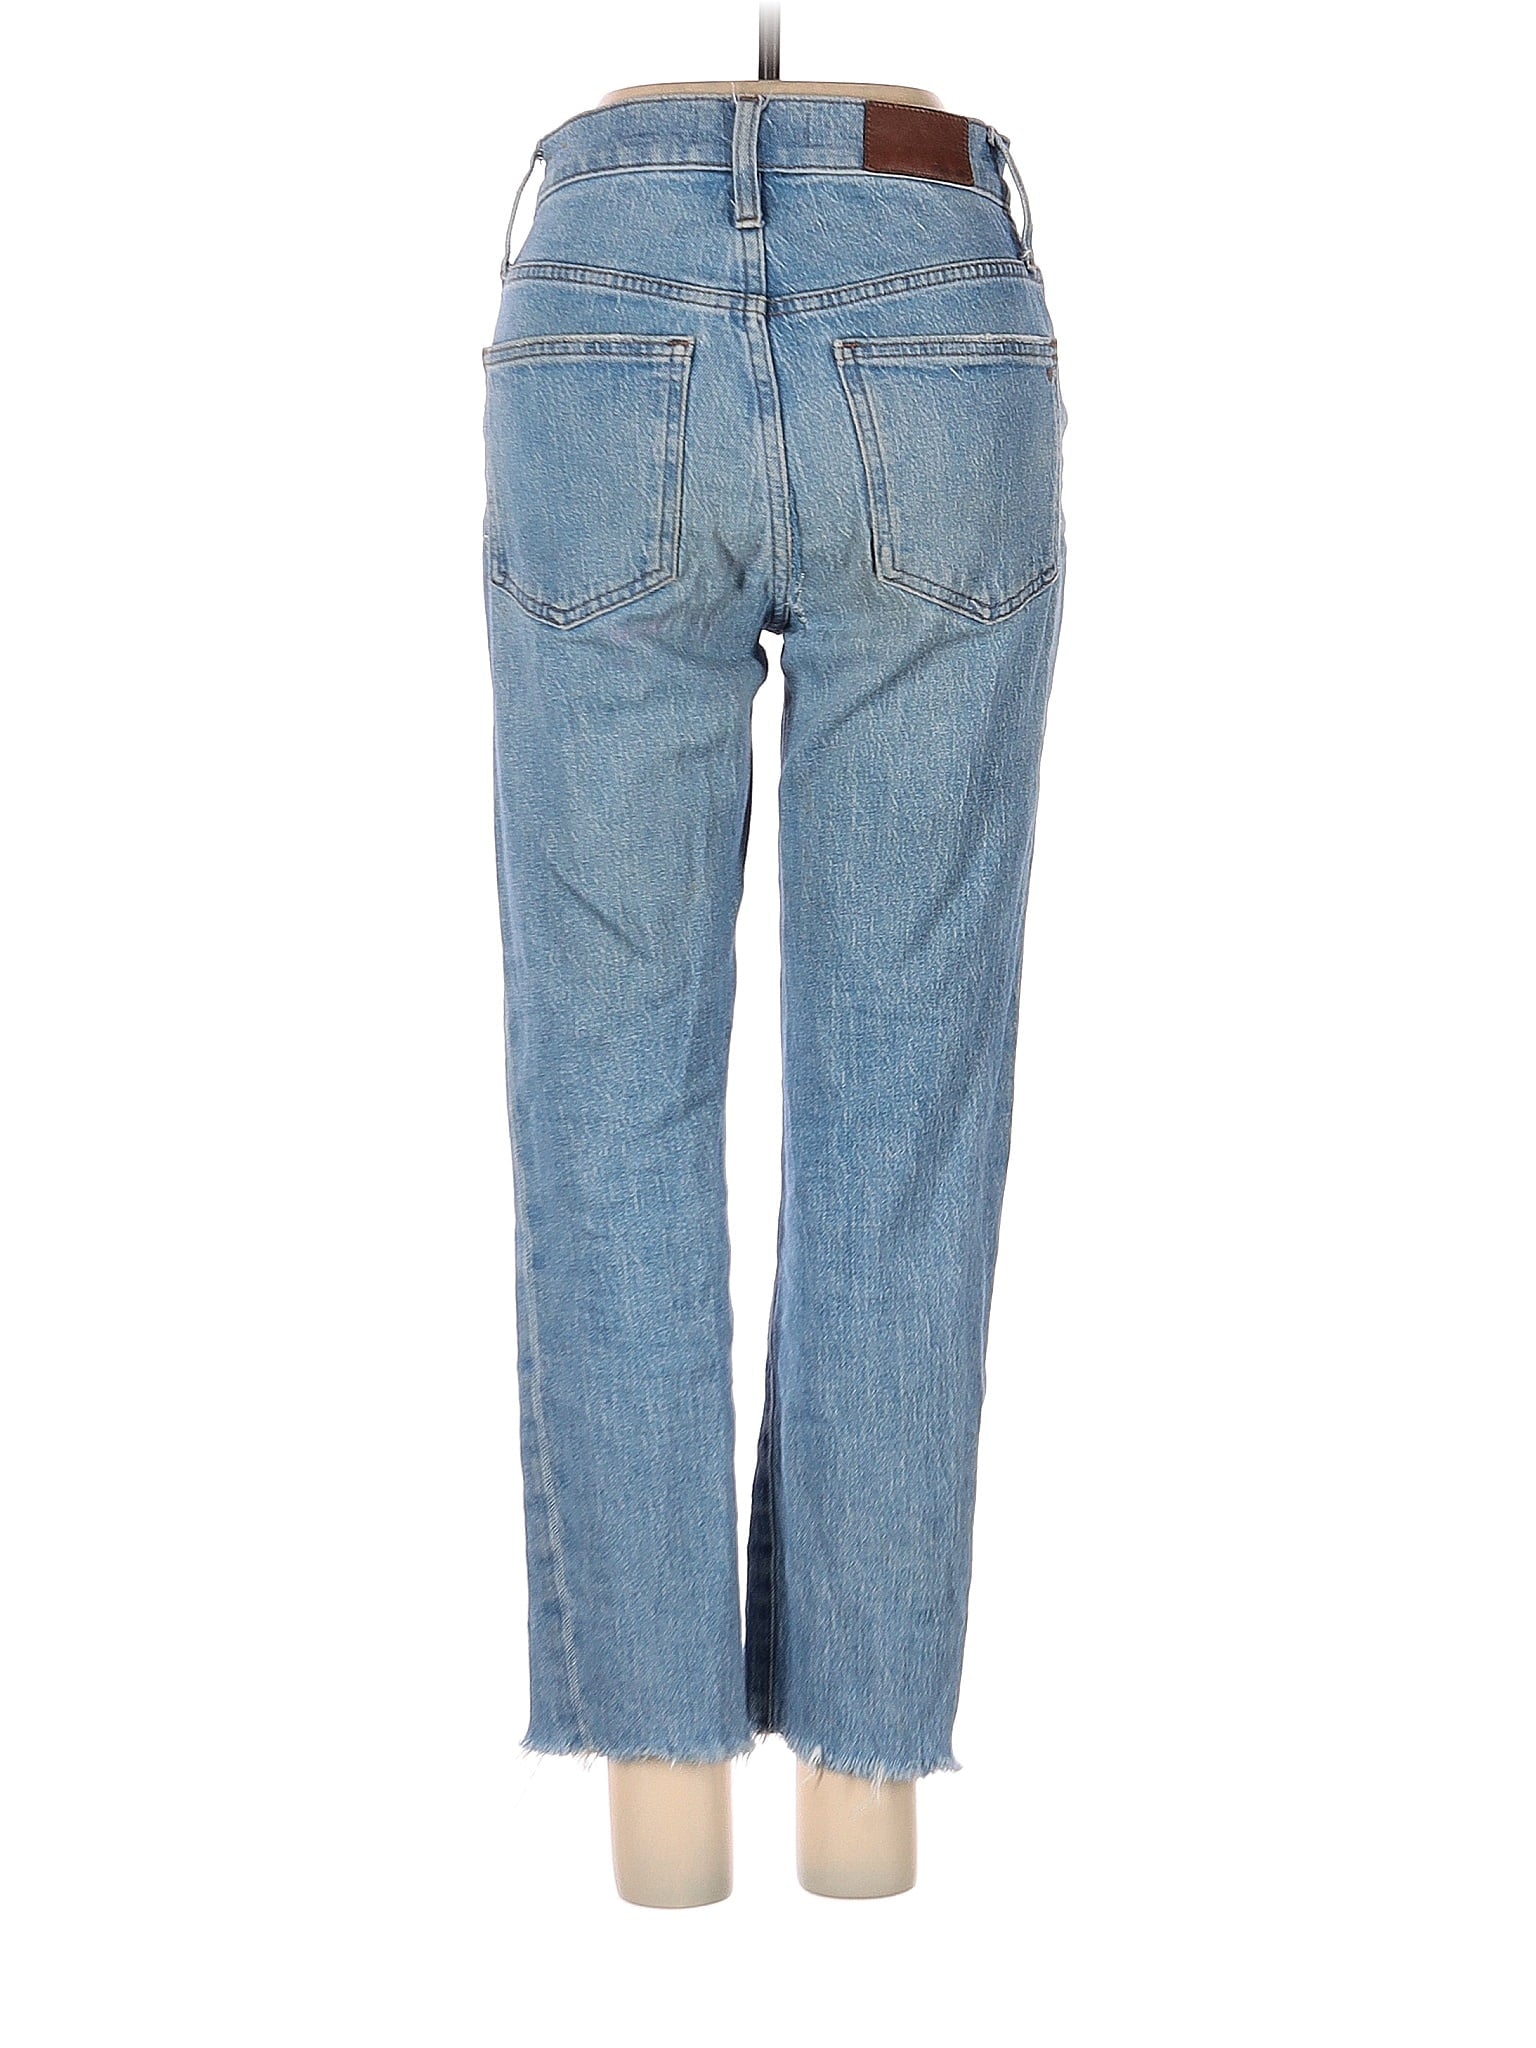 Mid-Rise Boyjeans The Petite Perfect Vintage Jean In Enmore Wash: Raw-Hem Edition in Medium Wash waist size - 23 P